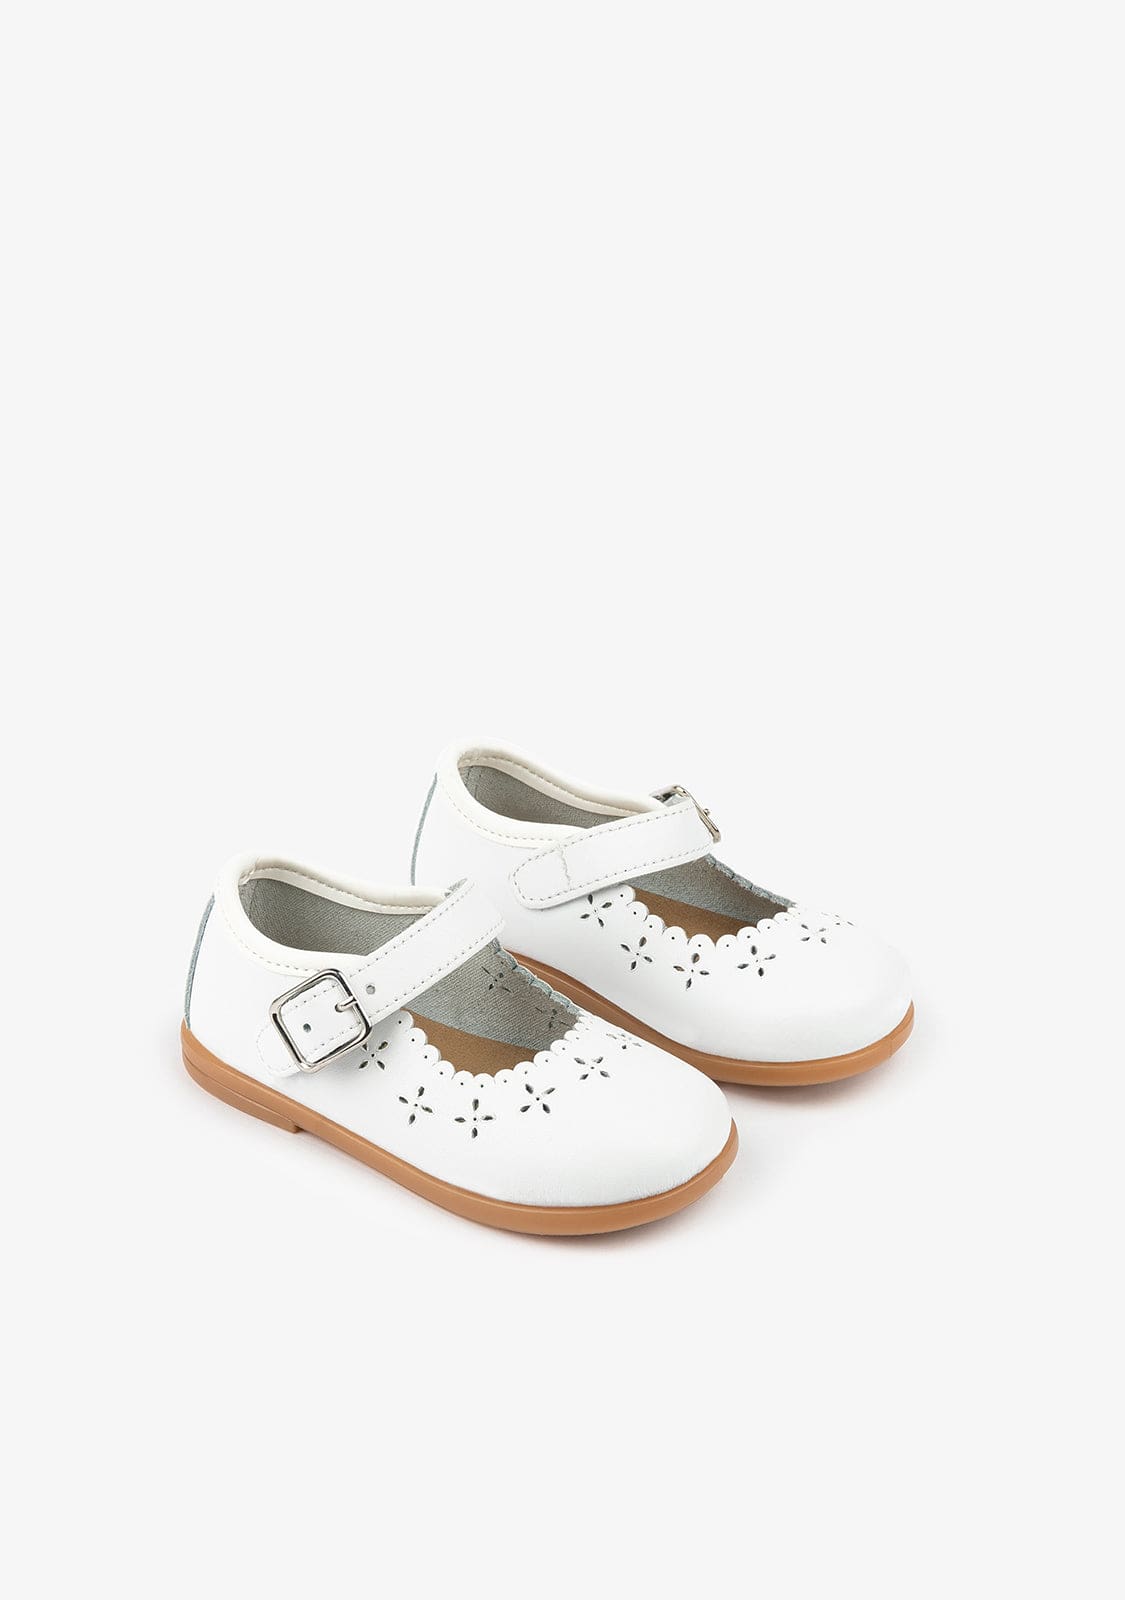 OSITO Shoes Baby's White Flowers Washable Leather Mary Janes